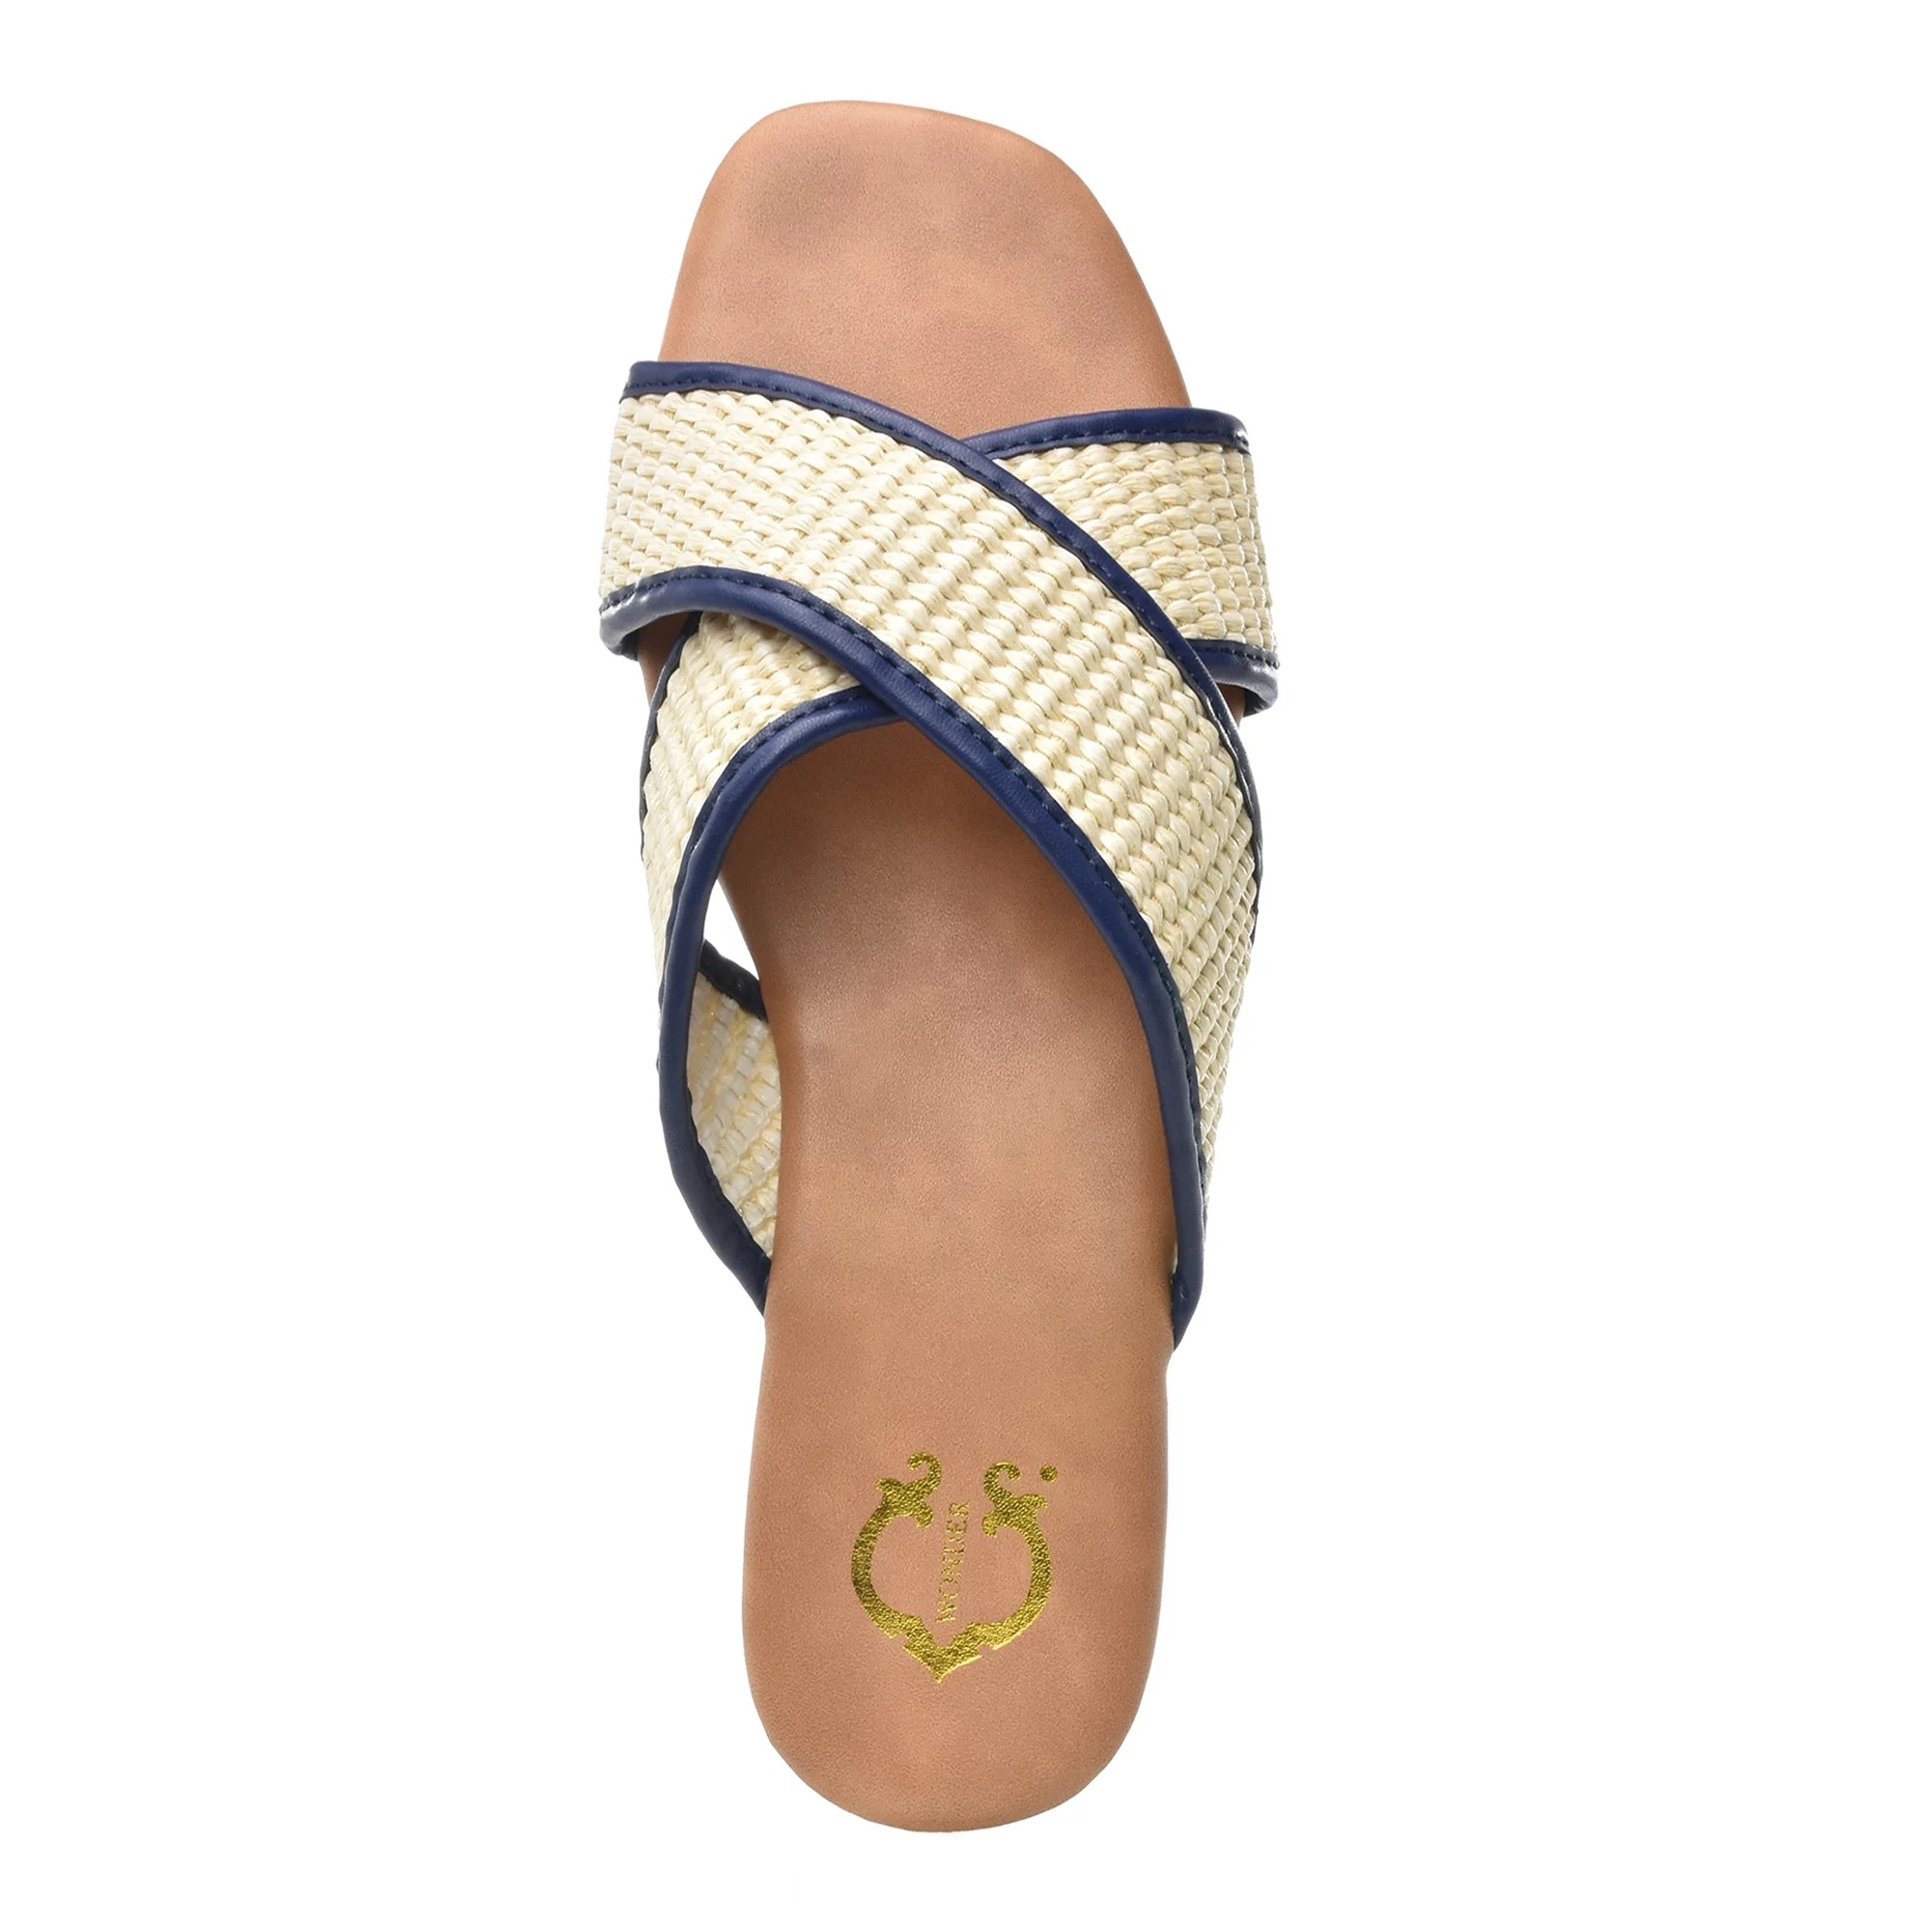 The crossband sandals